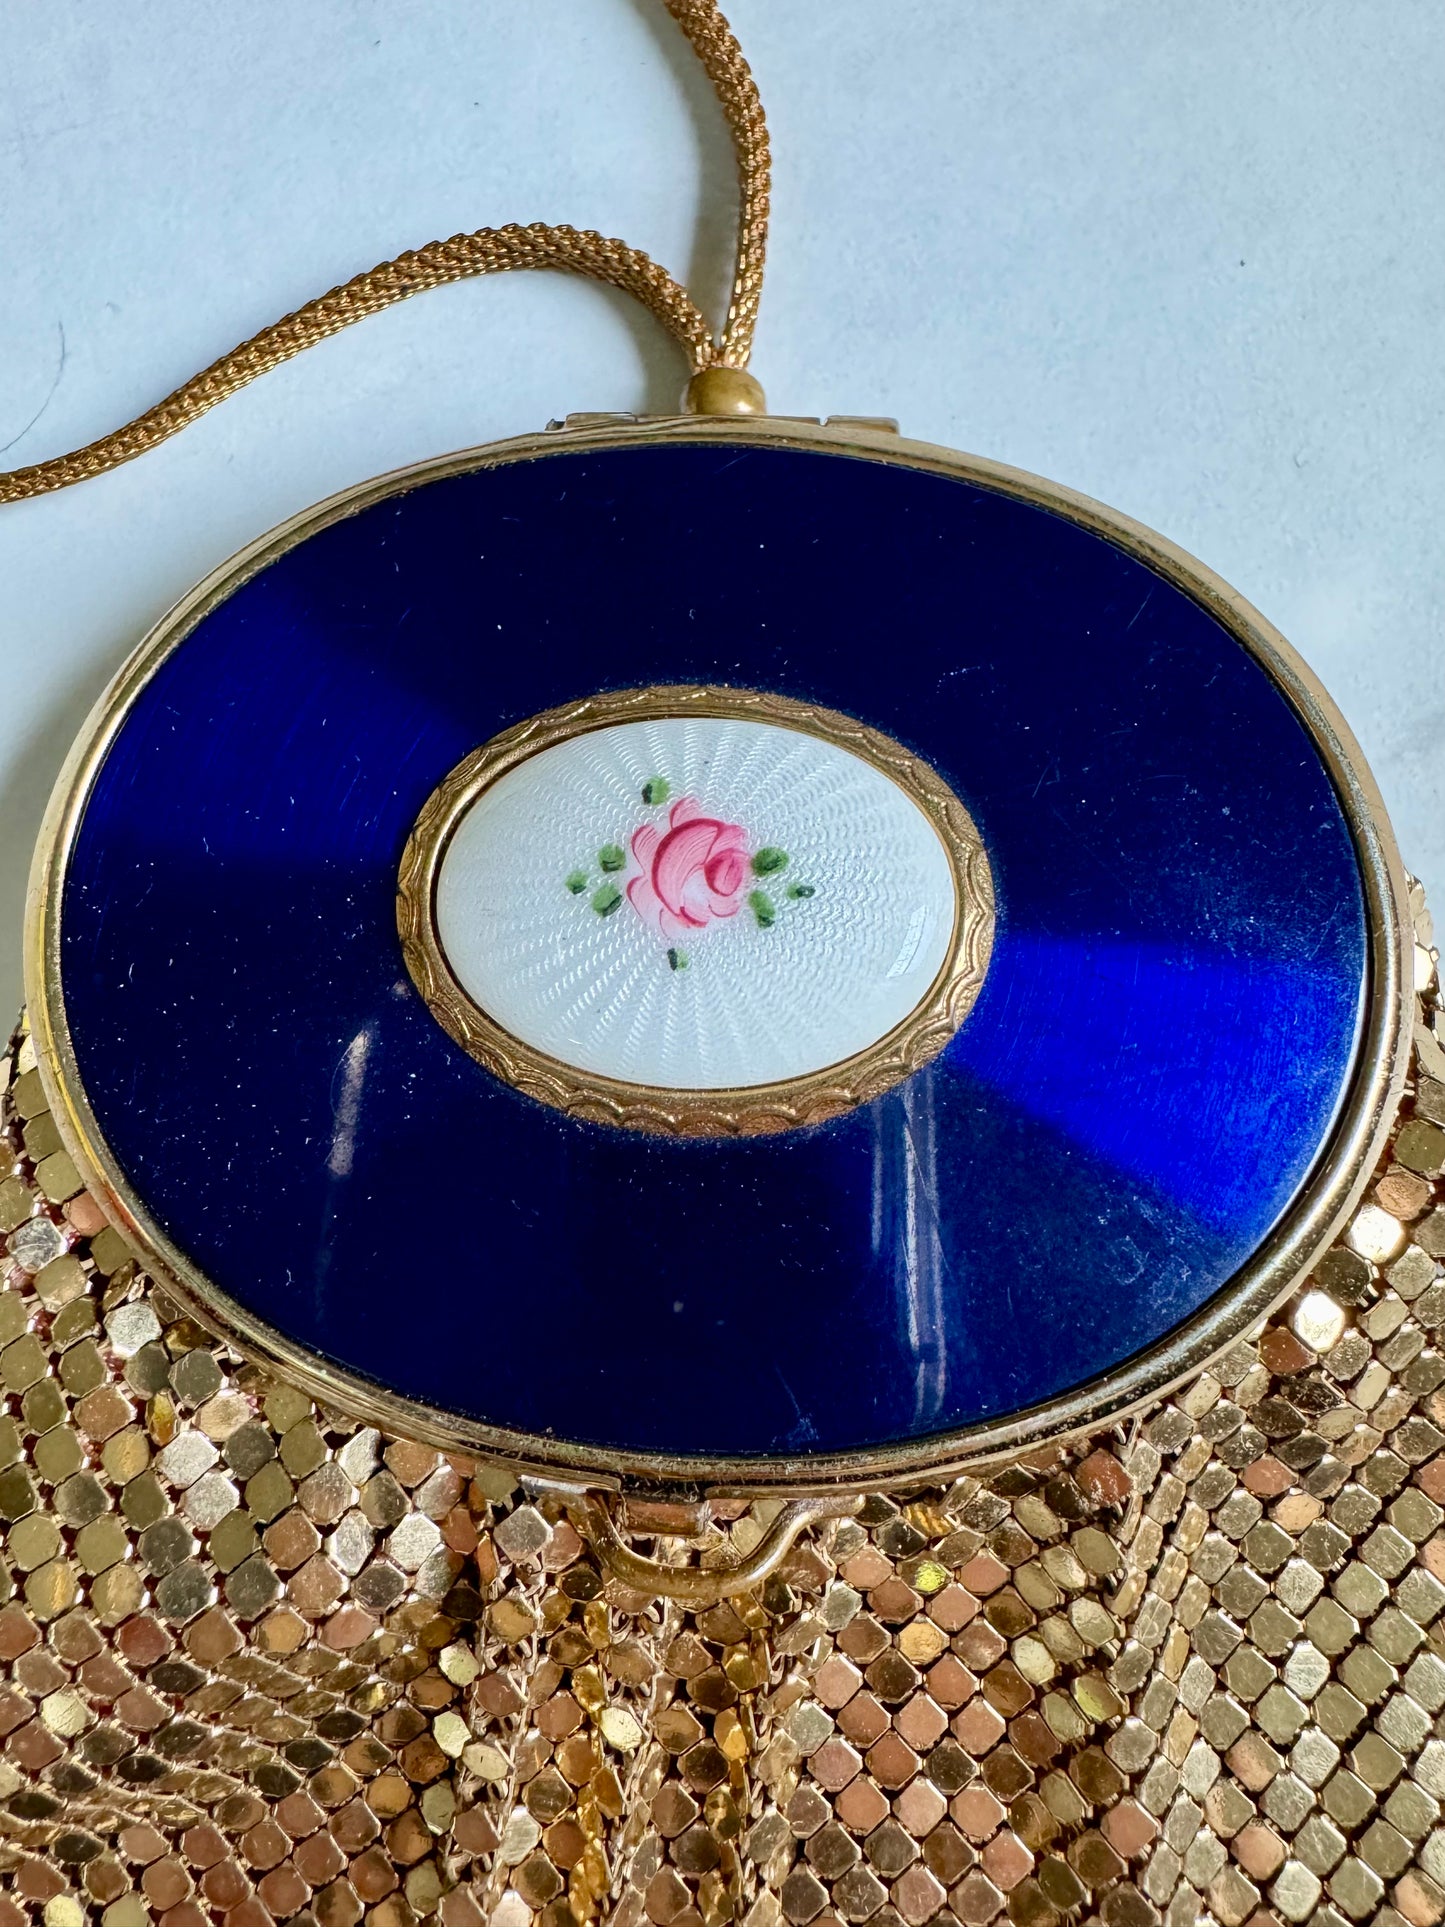 Stunning 1940's vintage mesh powder compact purse with enamel top